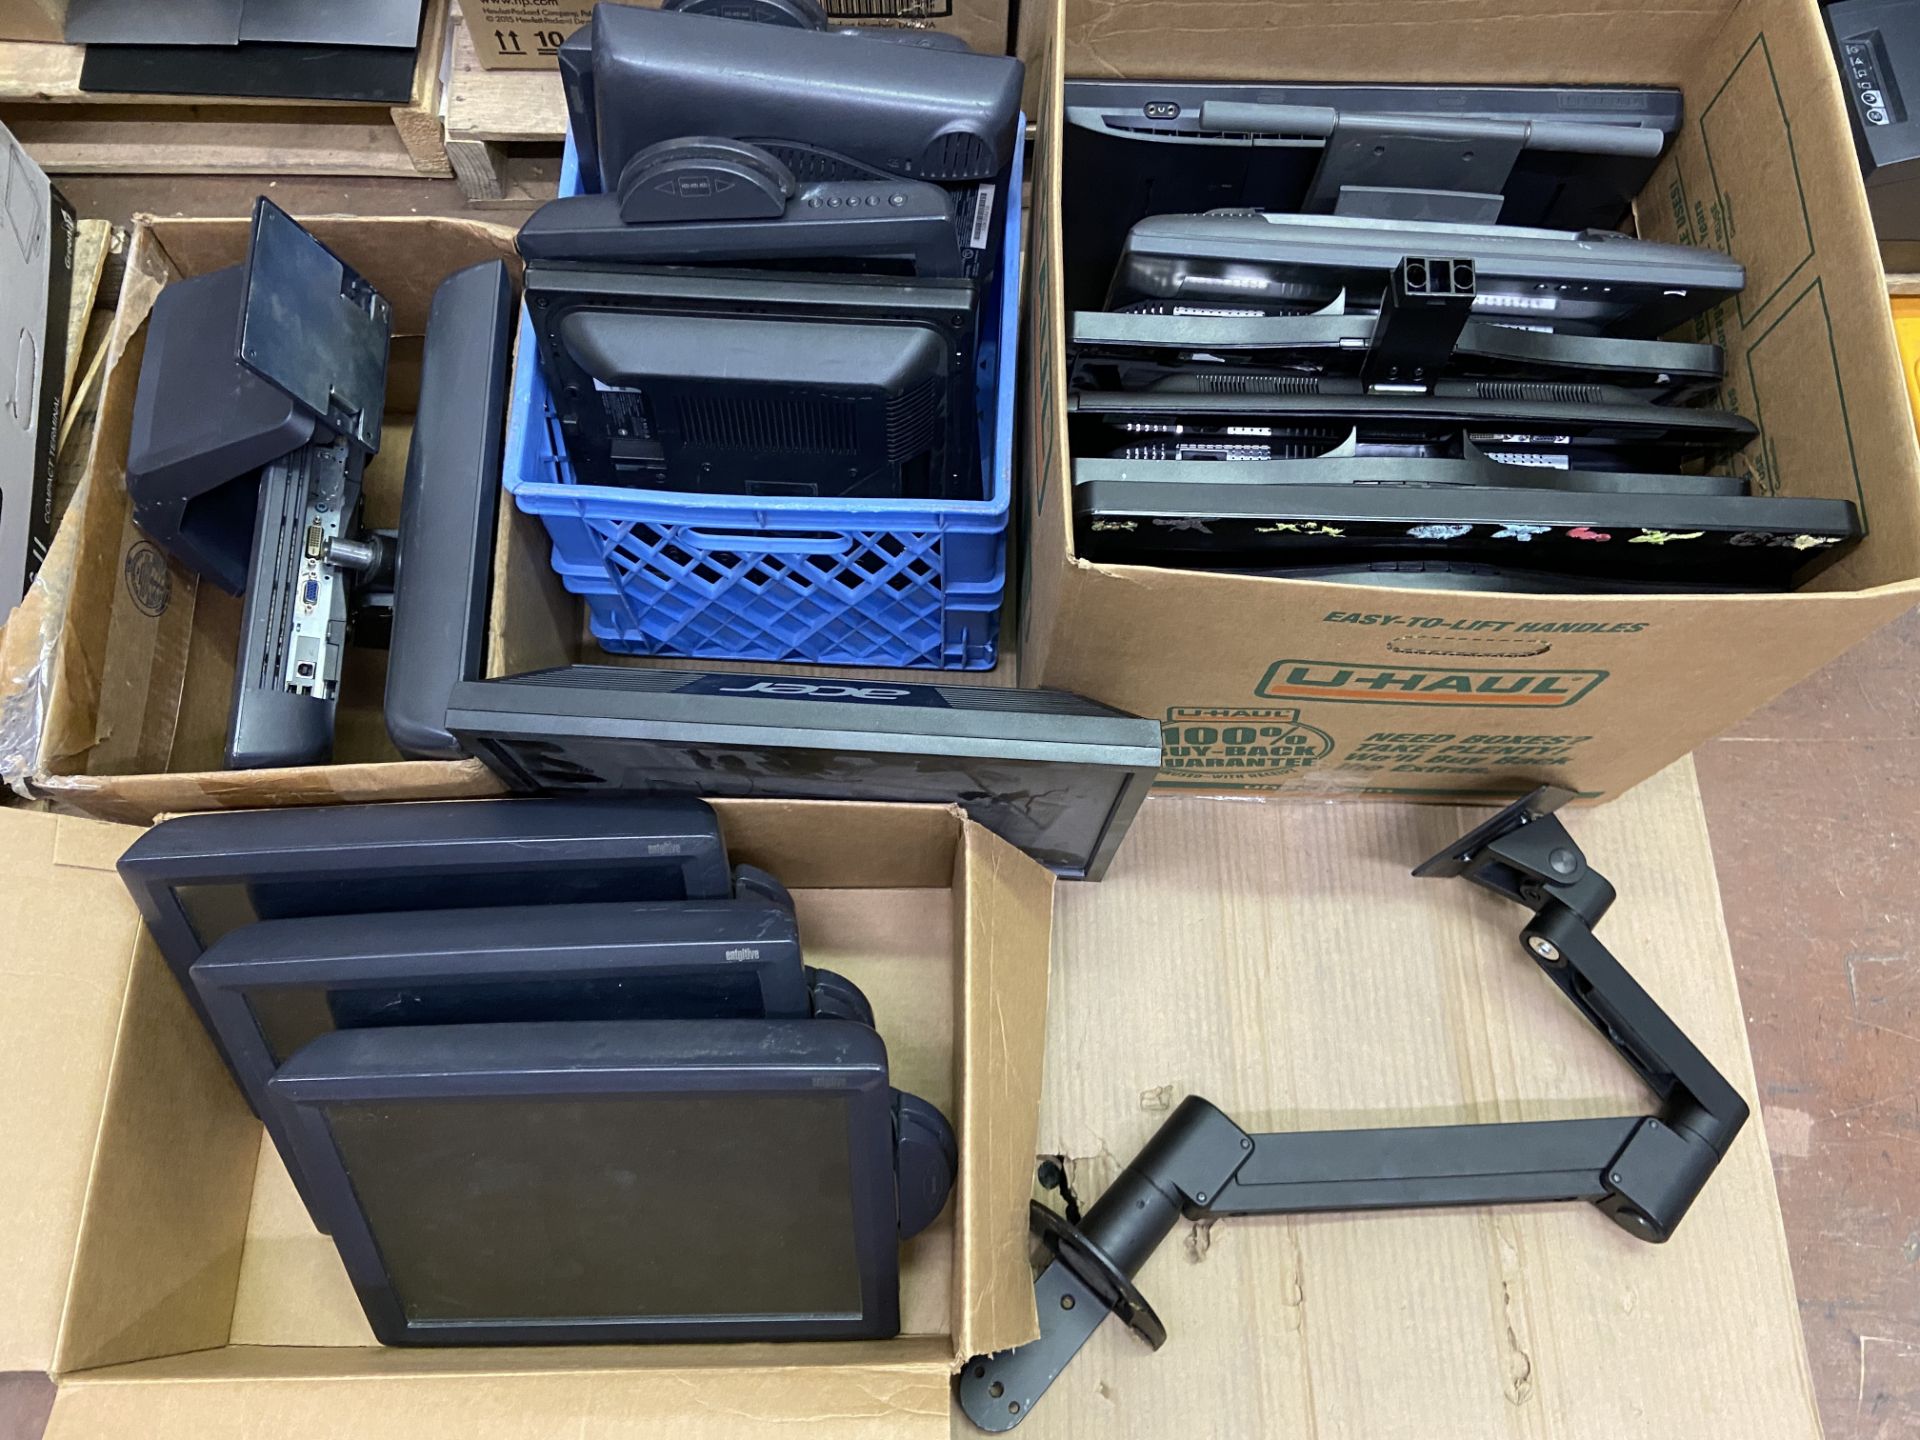 Short Pallet of 17 POS monitors, Standing Monitor Stand Etc - Image 2 of 5